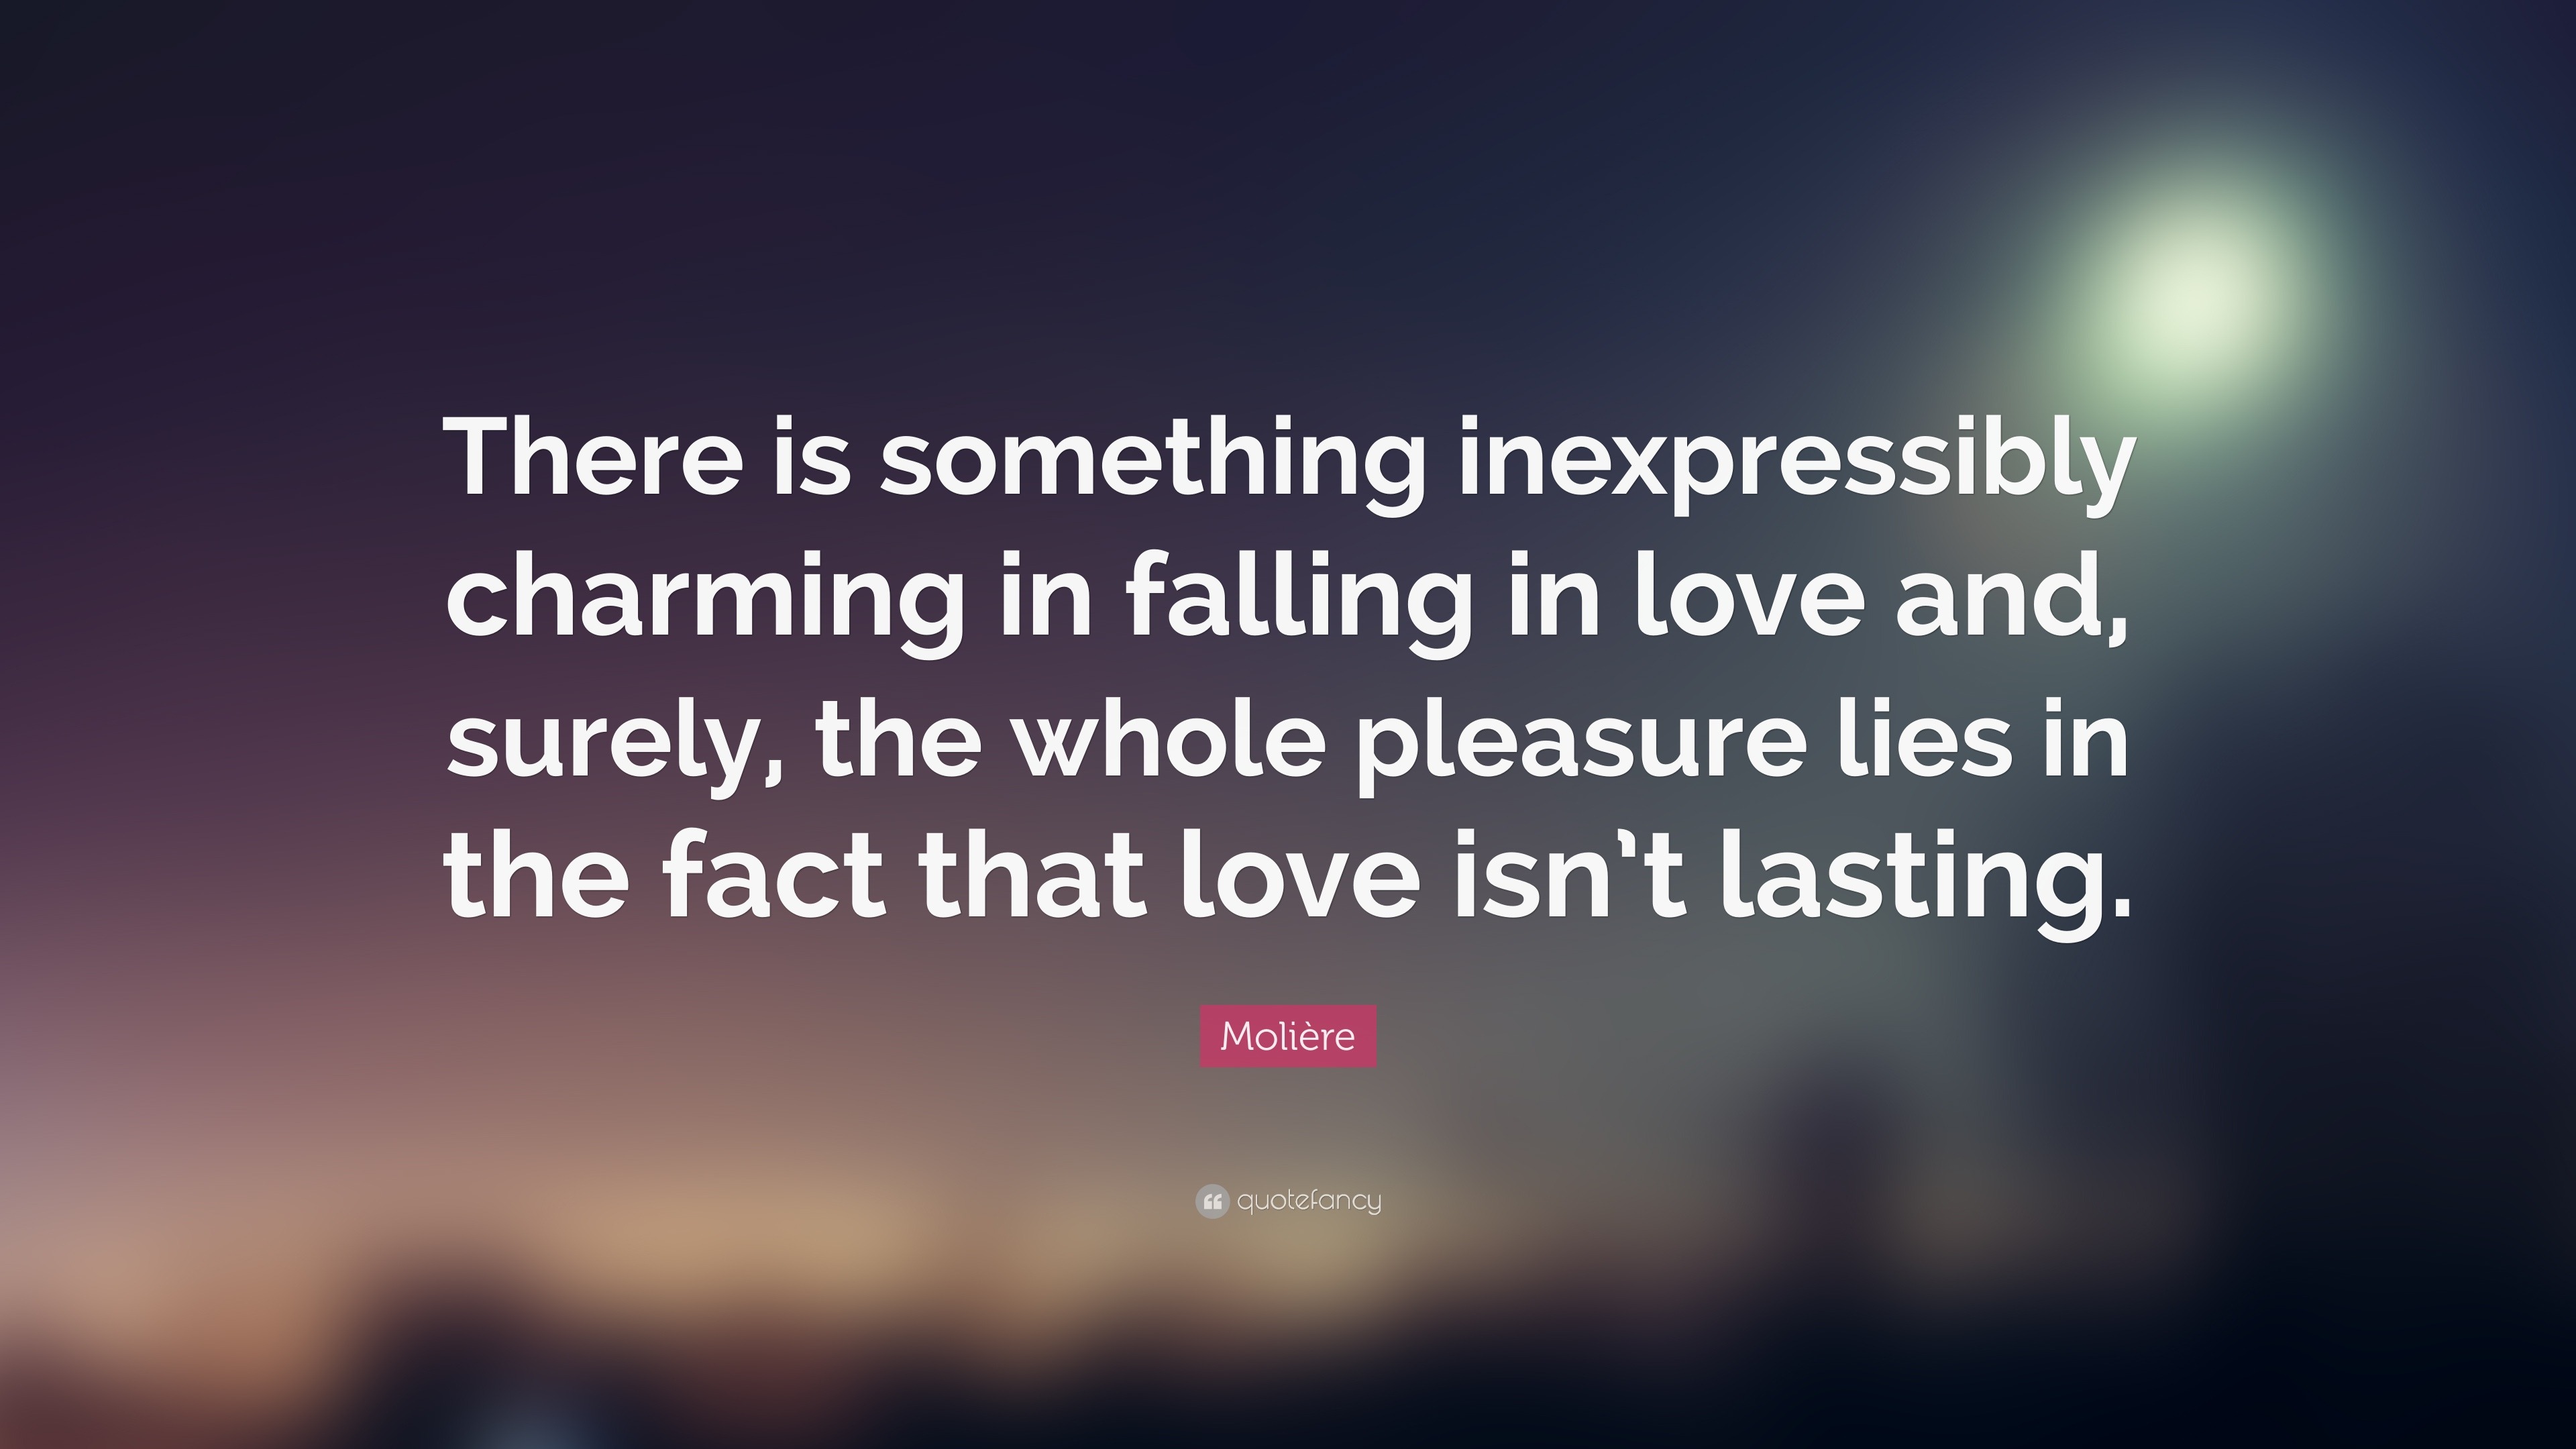 Molière Quote: “There is something inexpressibly charming in falling in ...